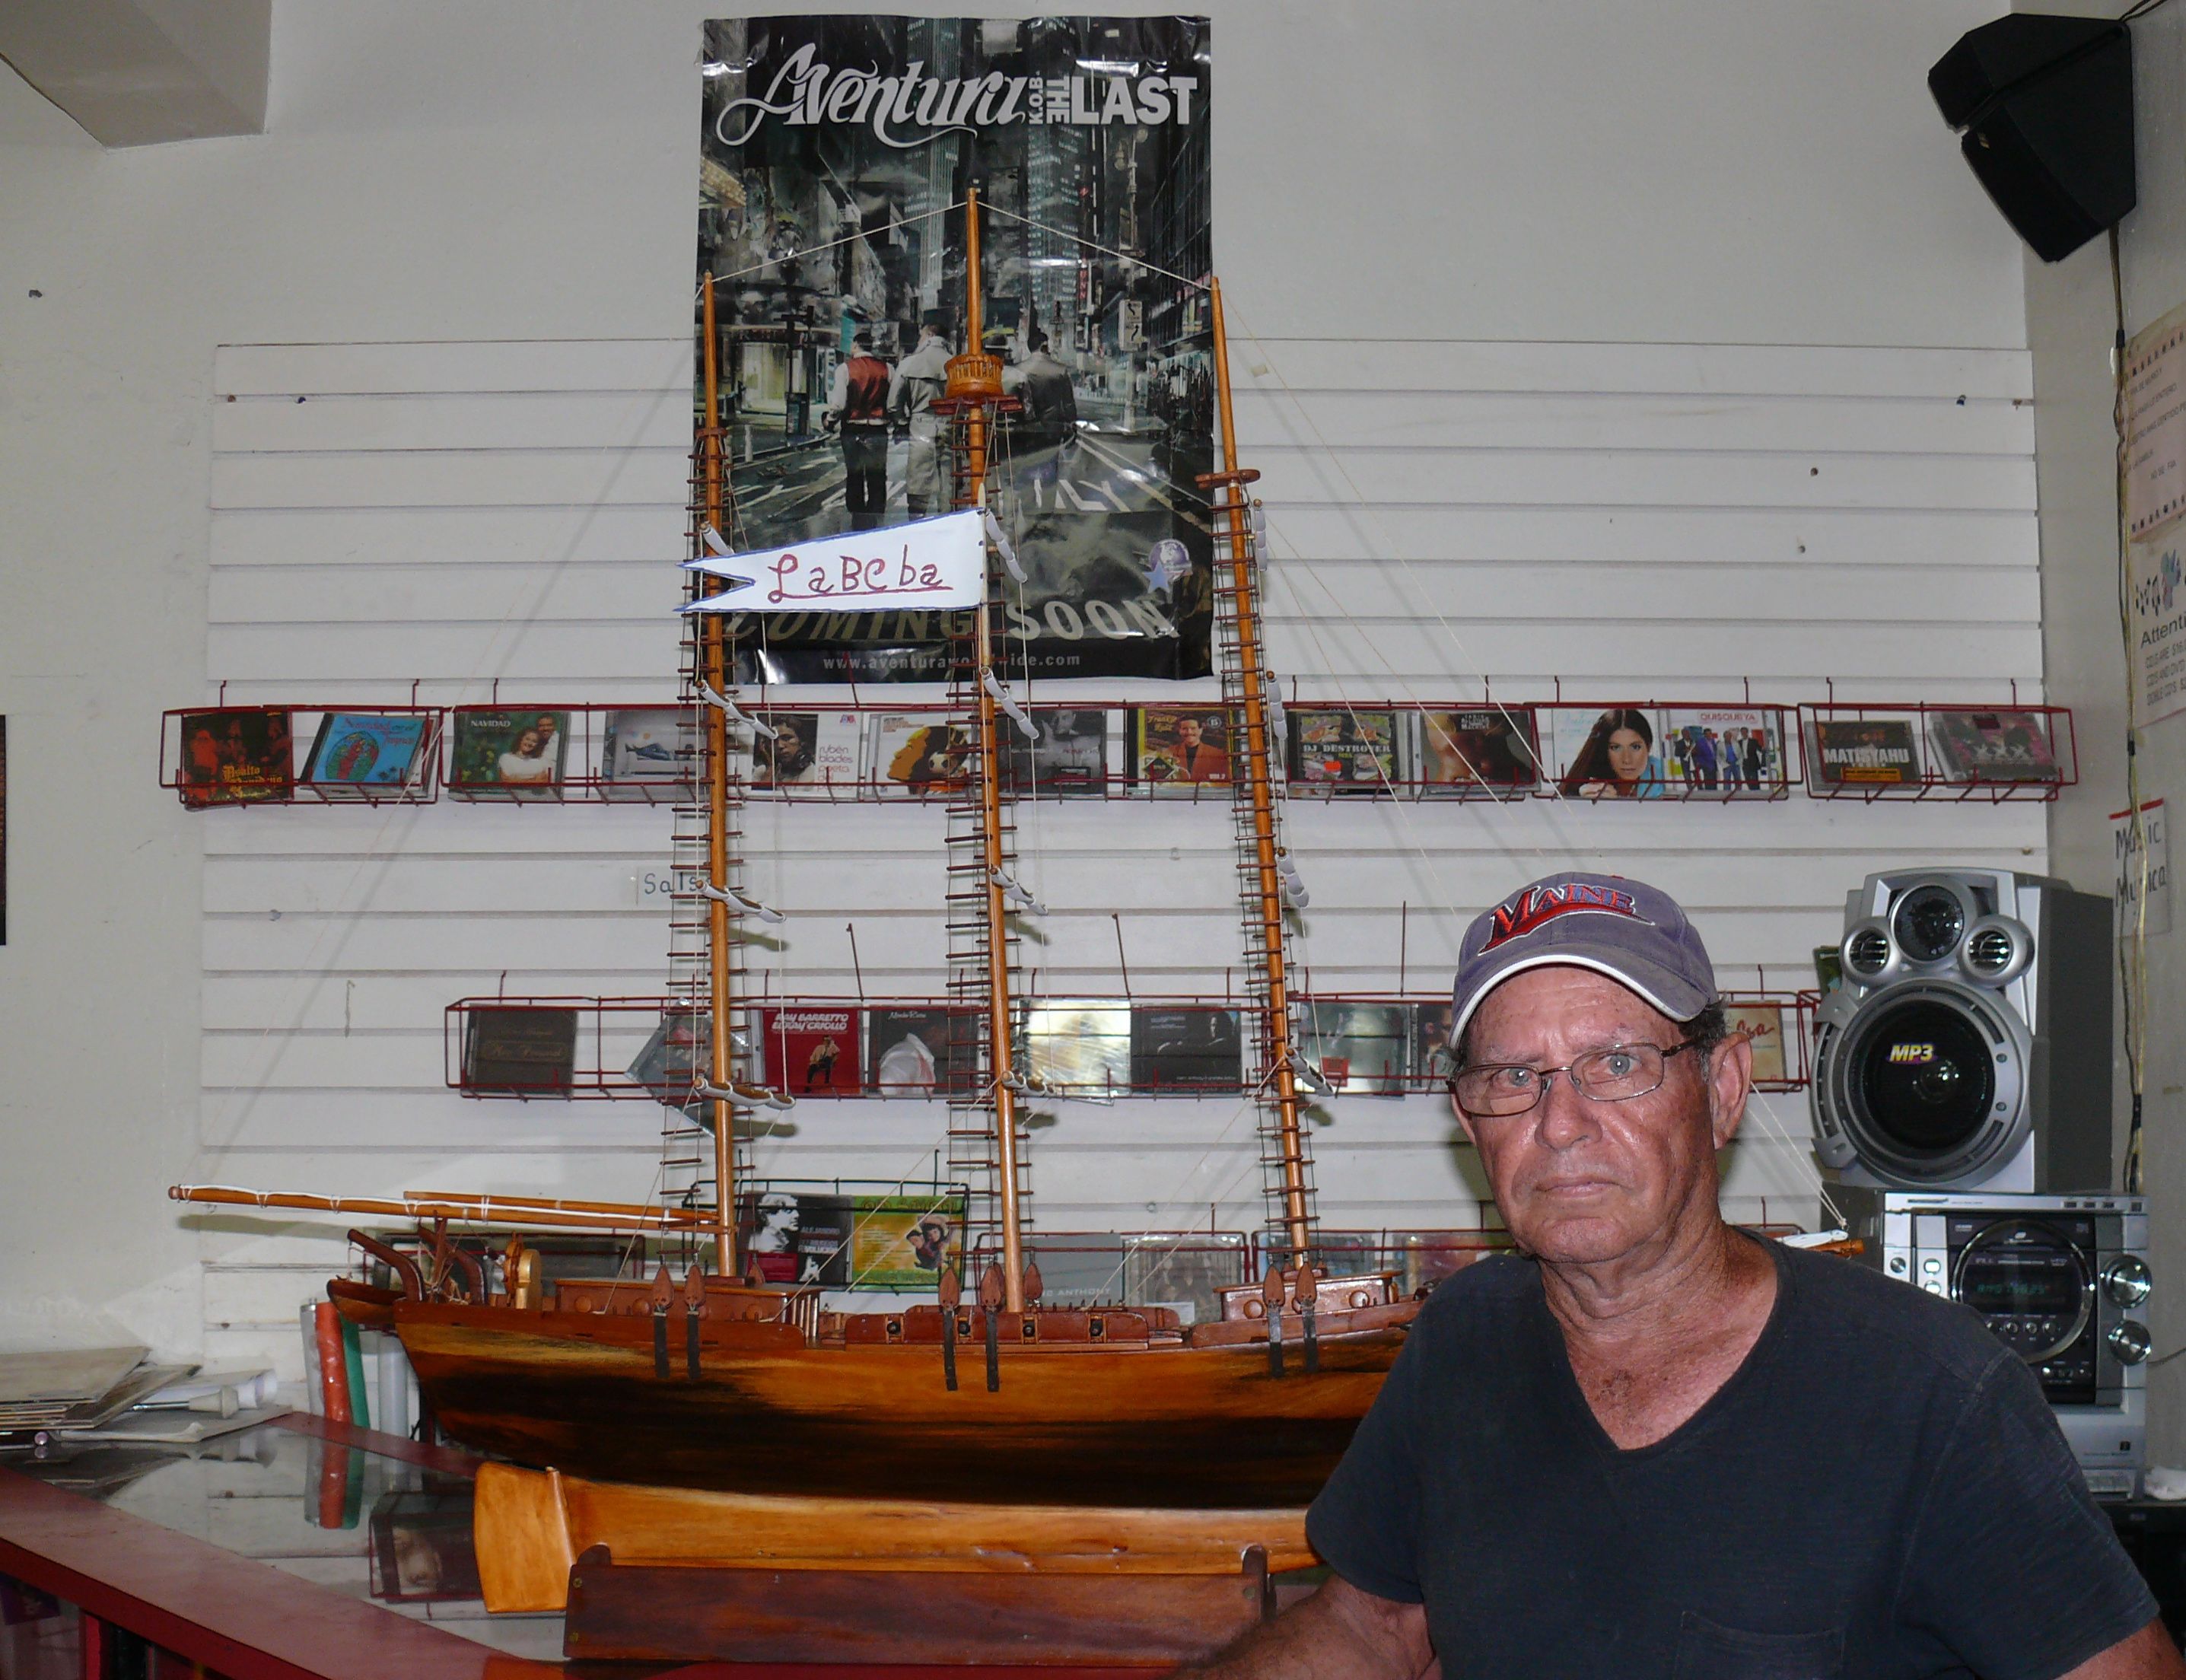 Jim Cruz Rios with his model boat, on display at J and W Grocery in Christiansted.